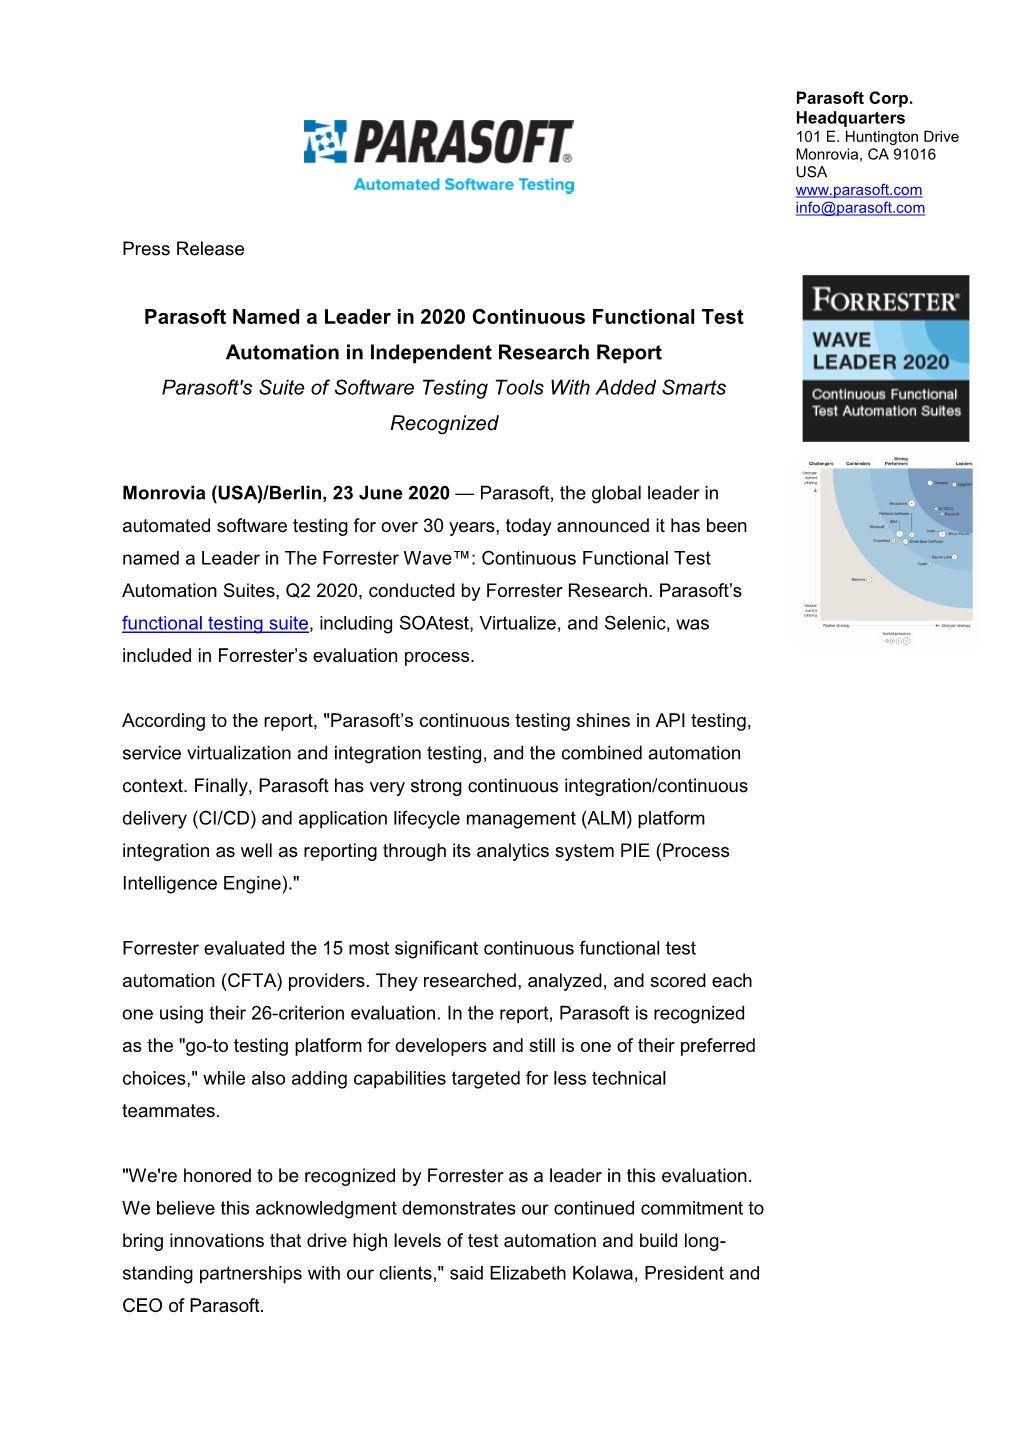 Parasoft Named a Leader in 2020 Continuous Functional Test